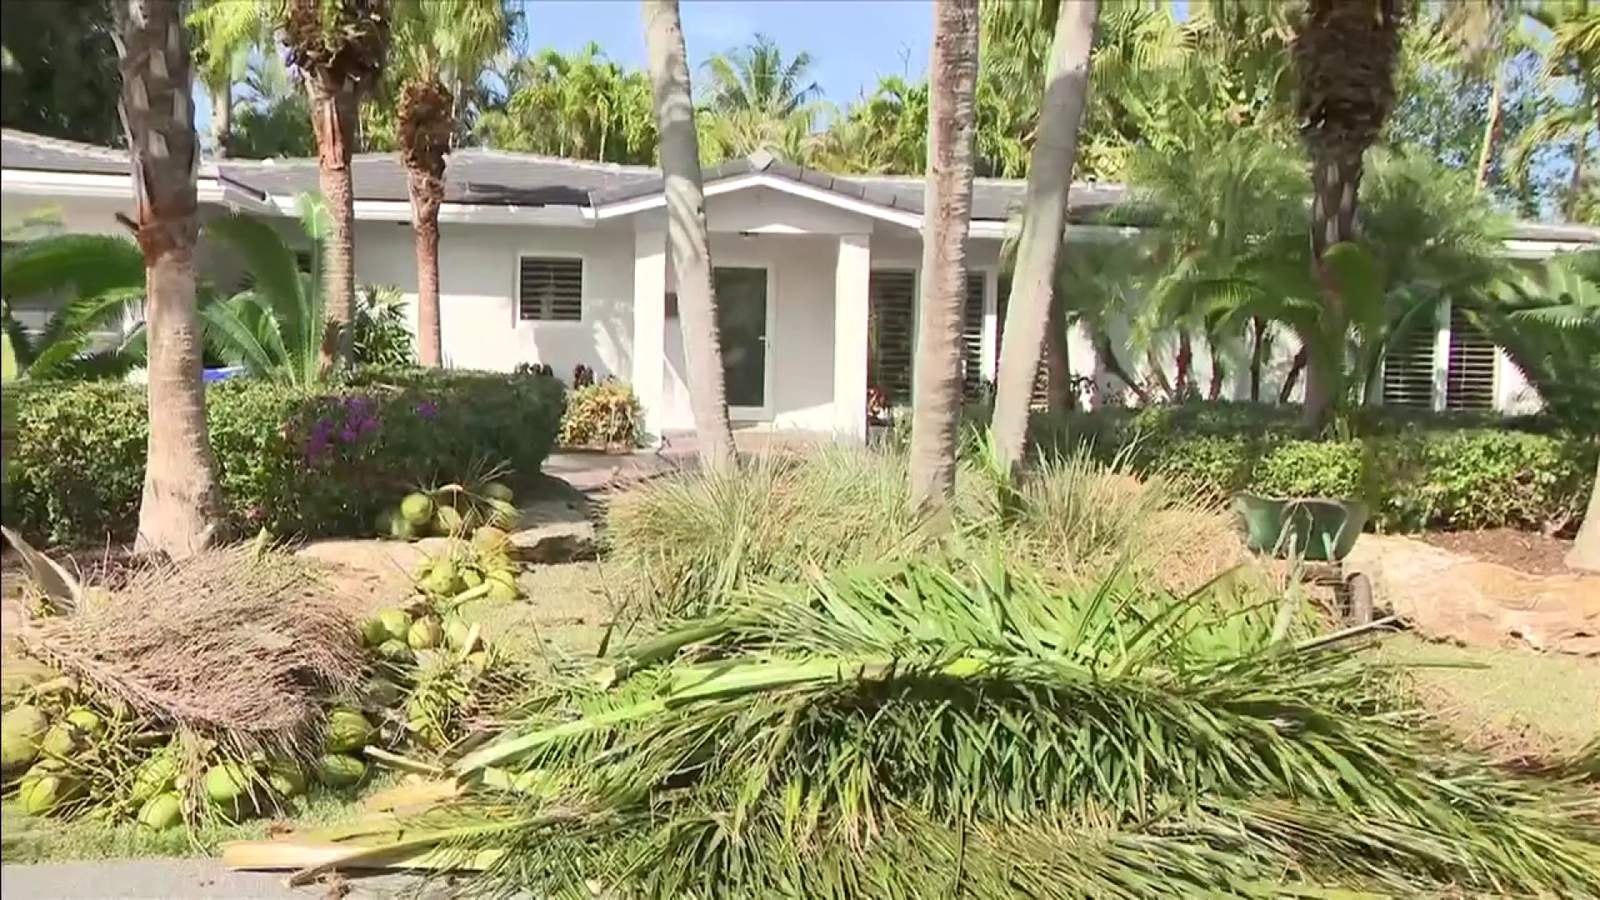 Tree-trimmer electrocuted working at Fort Lauderdale home